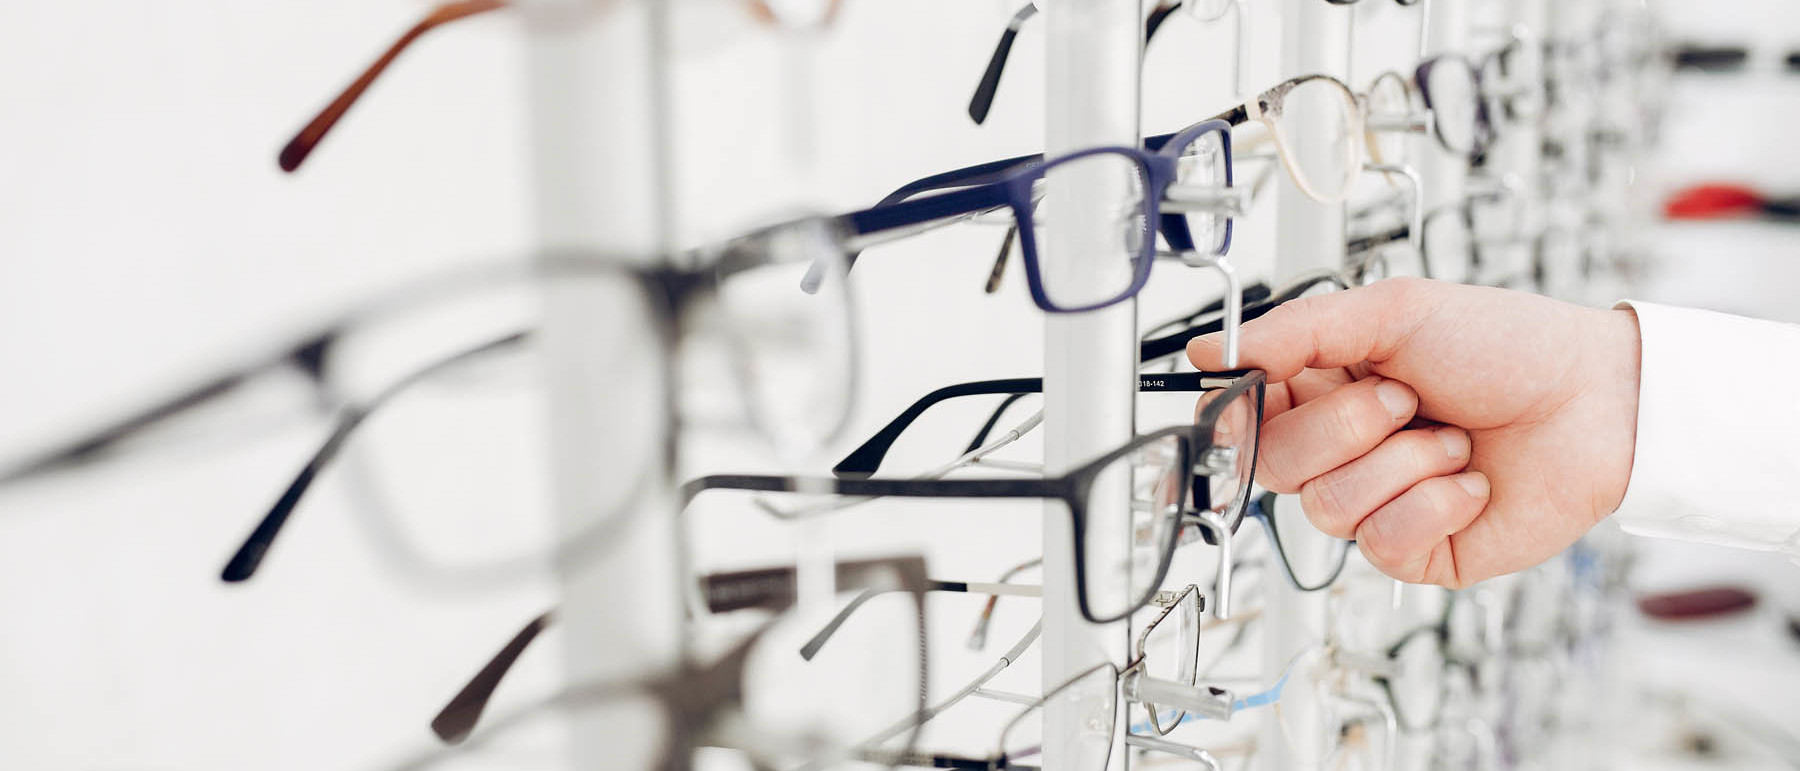 A person is selecting eyeglasses from a rack in an eye care store.